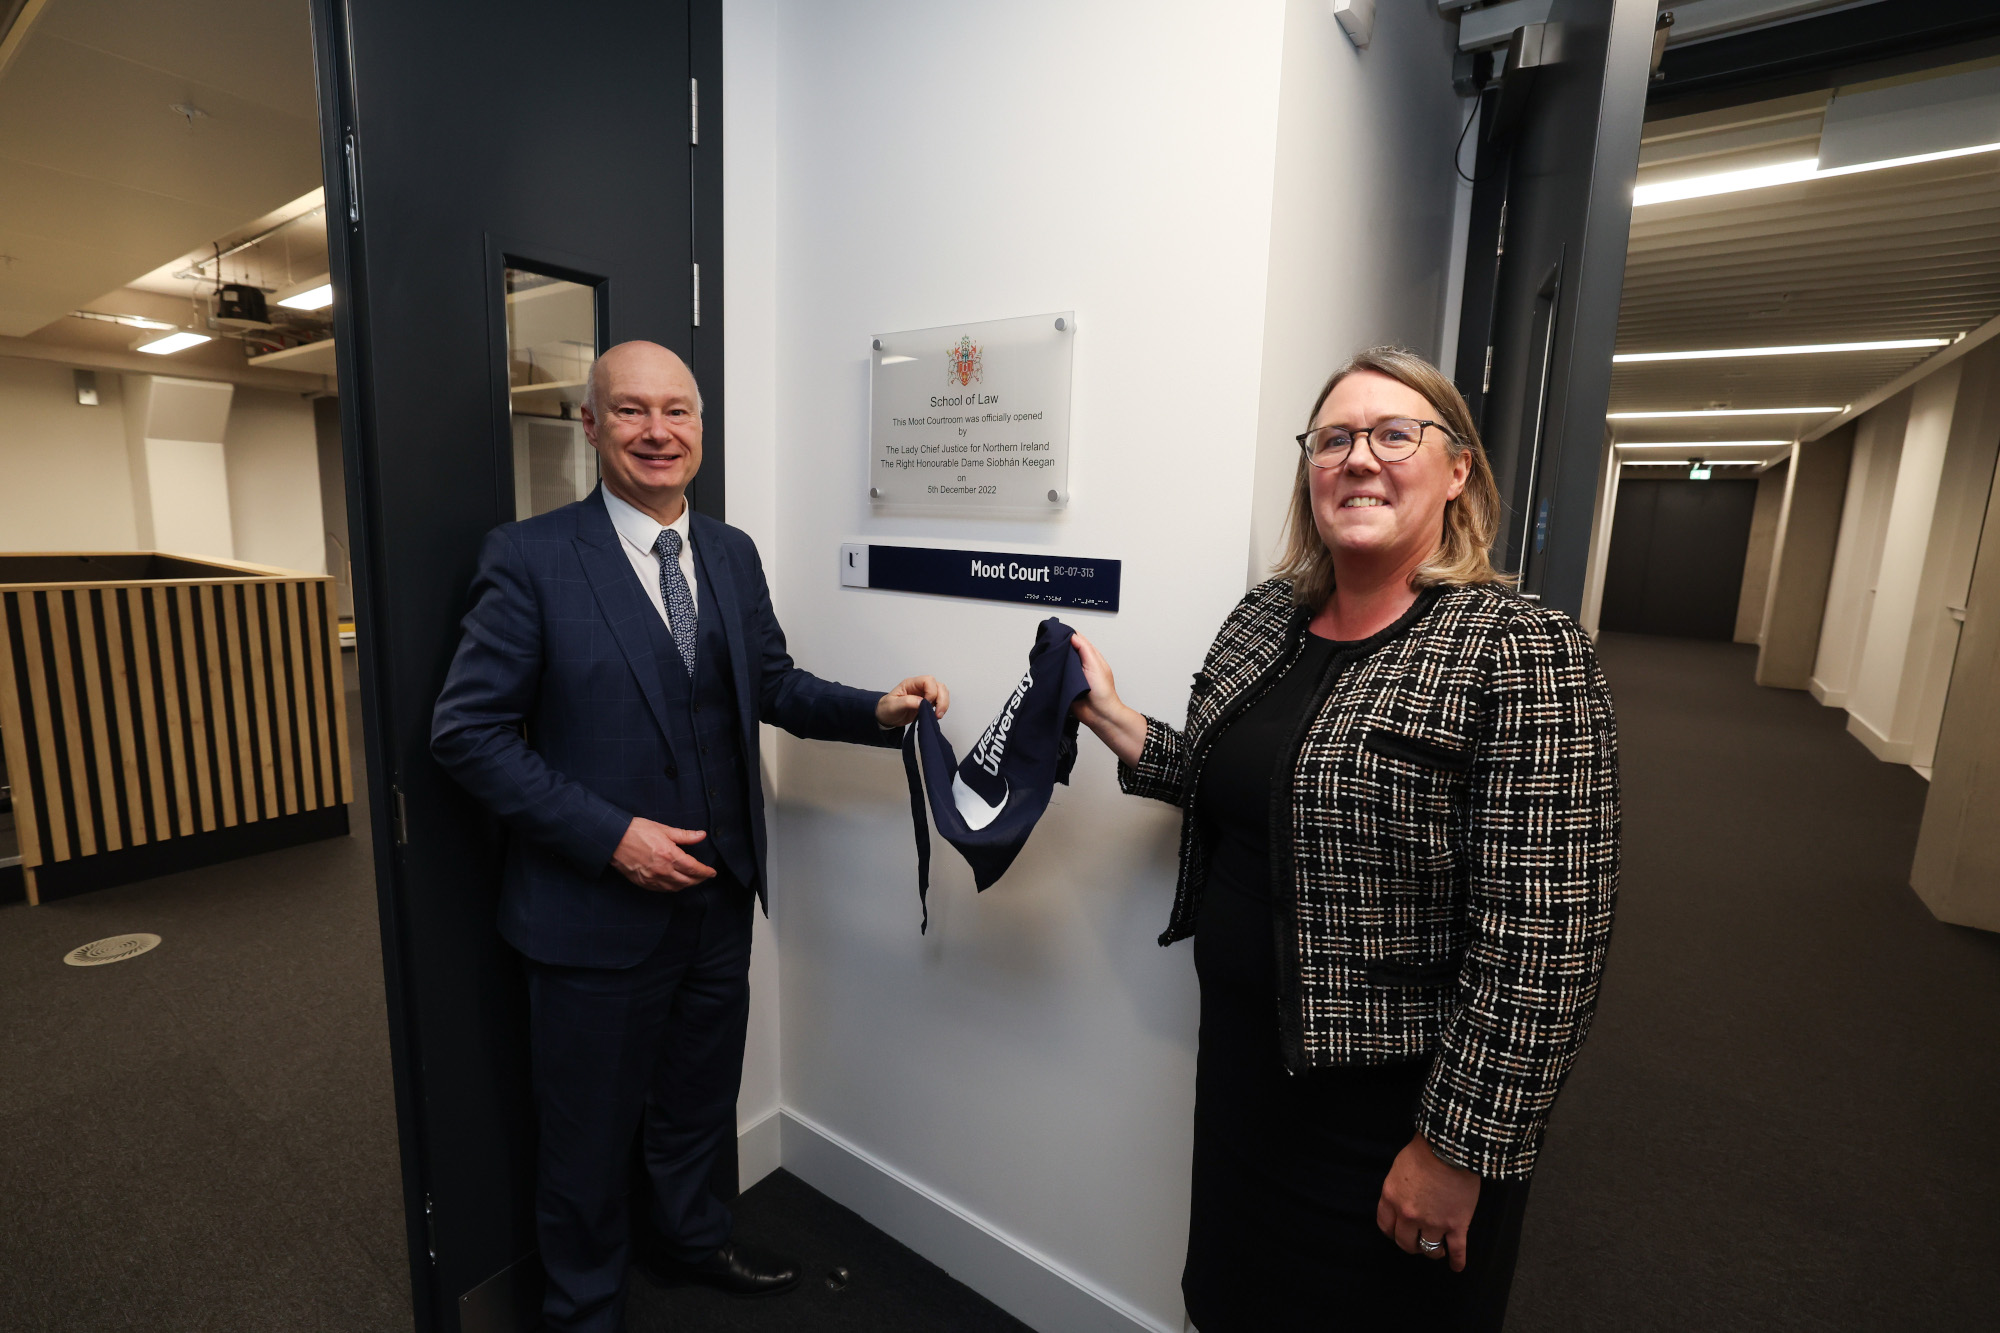 Lady Chief Justice officially opens new Ulster University moot court facility